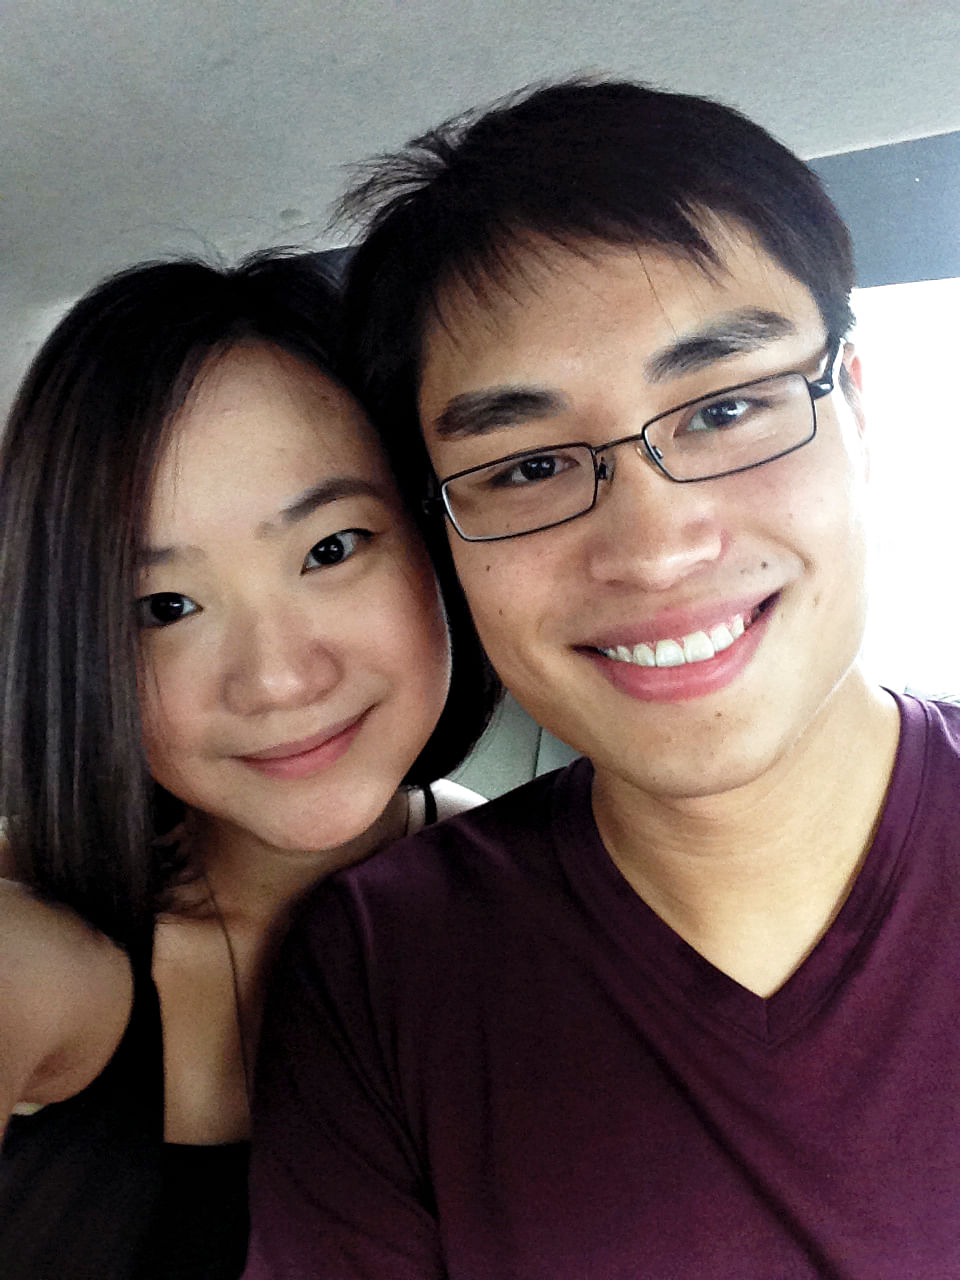 Nicole Seah on love and priorities in her marriage